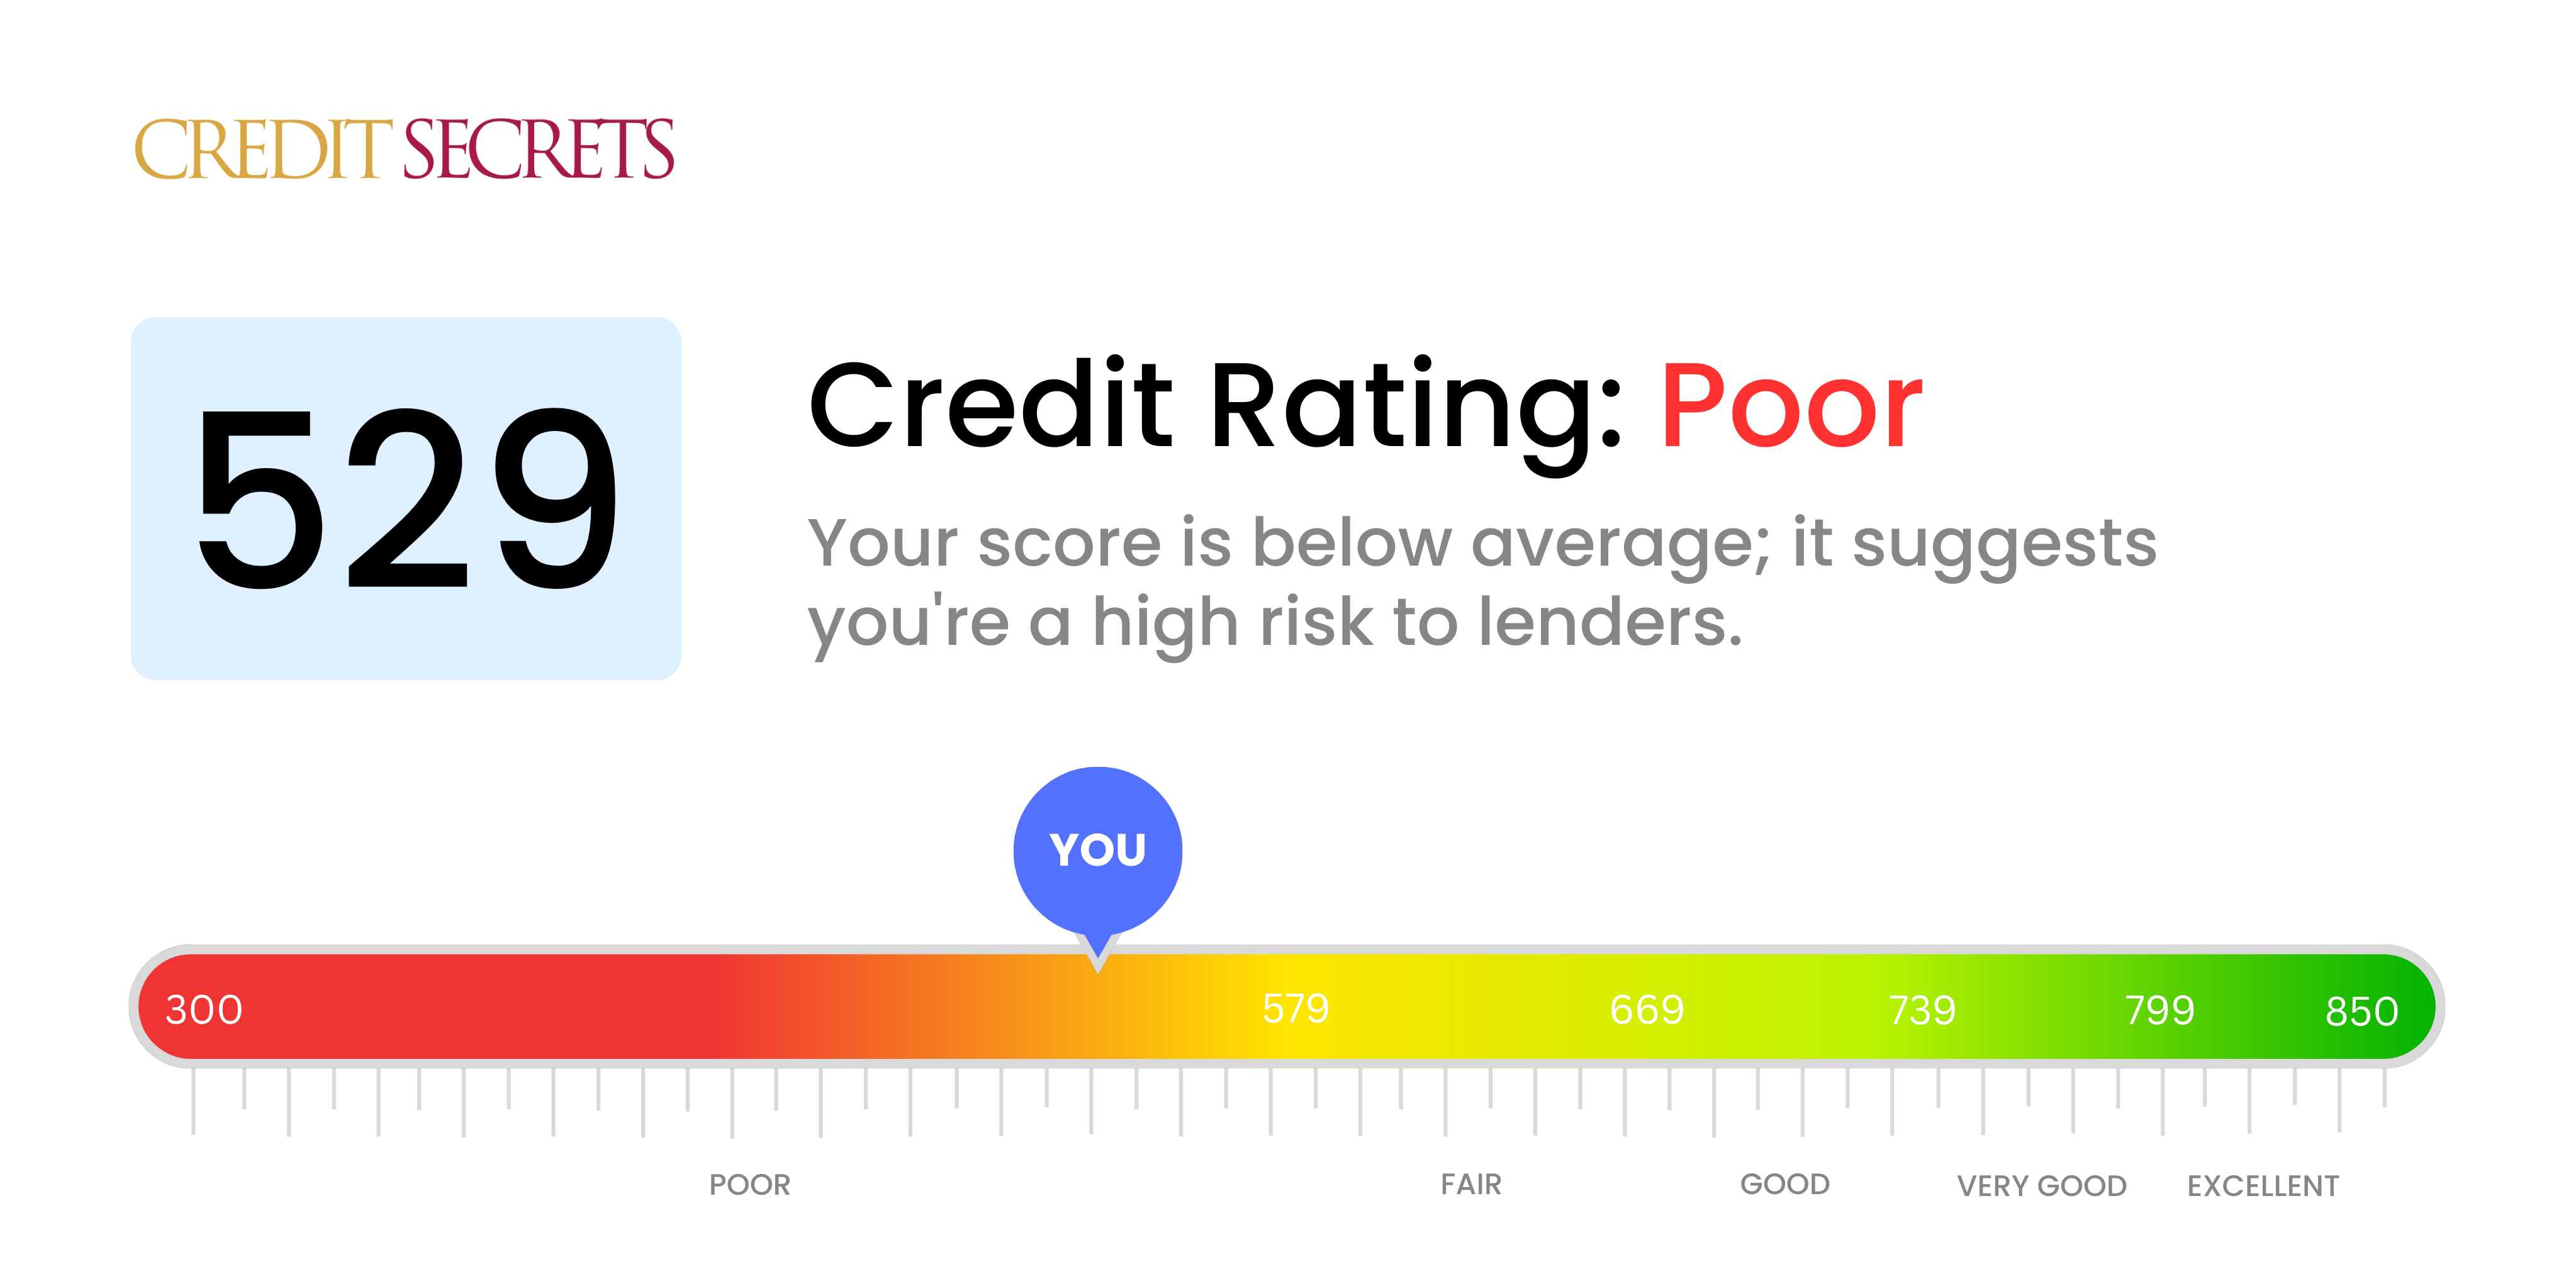 Is 529 a good credit score?